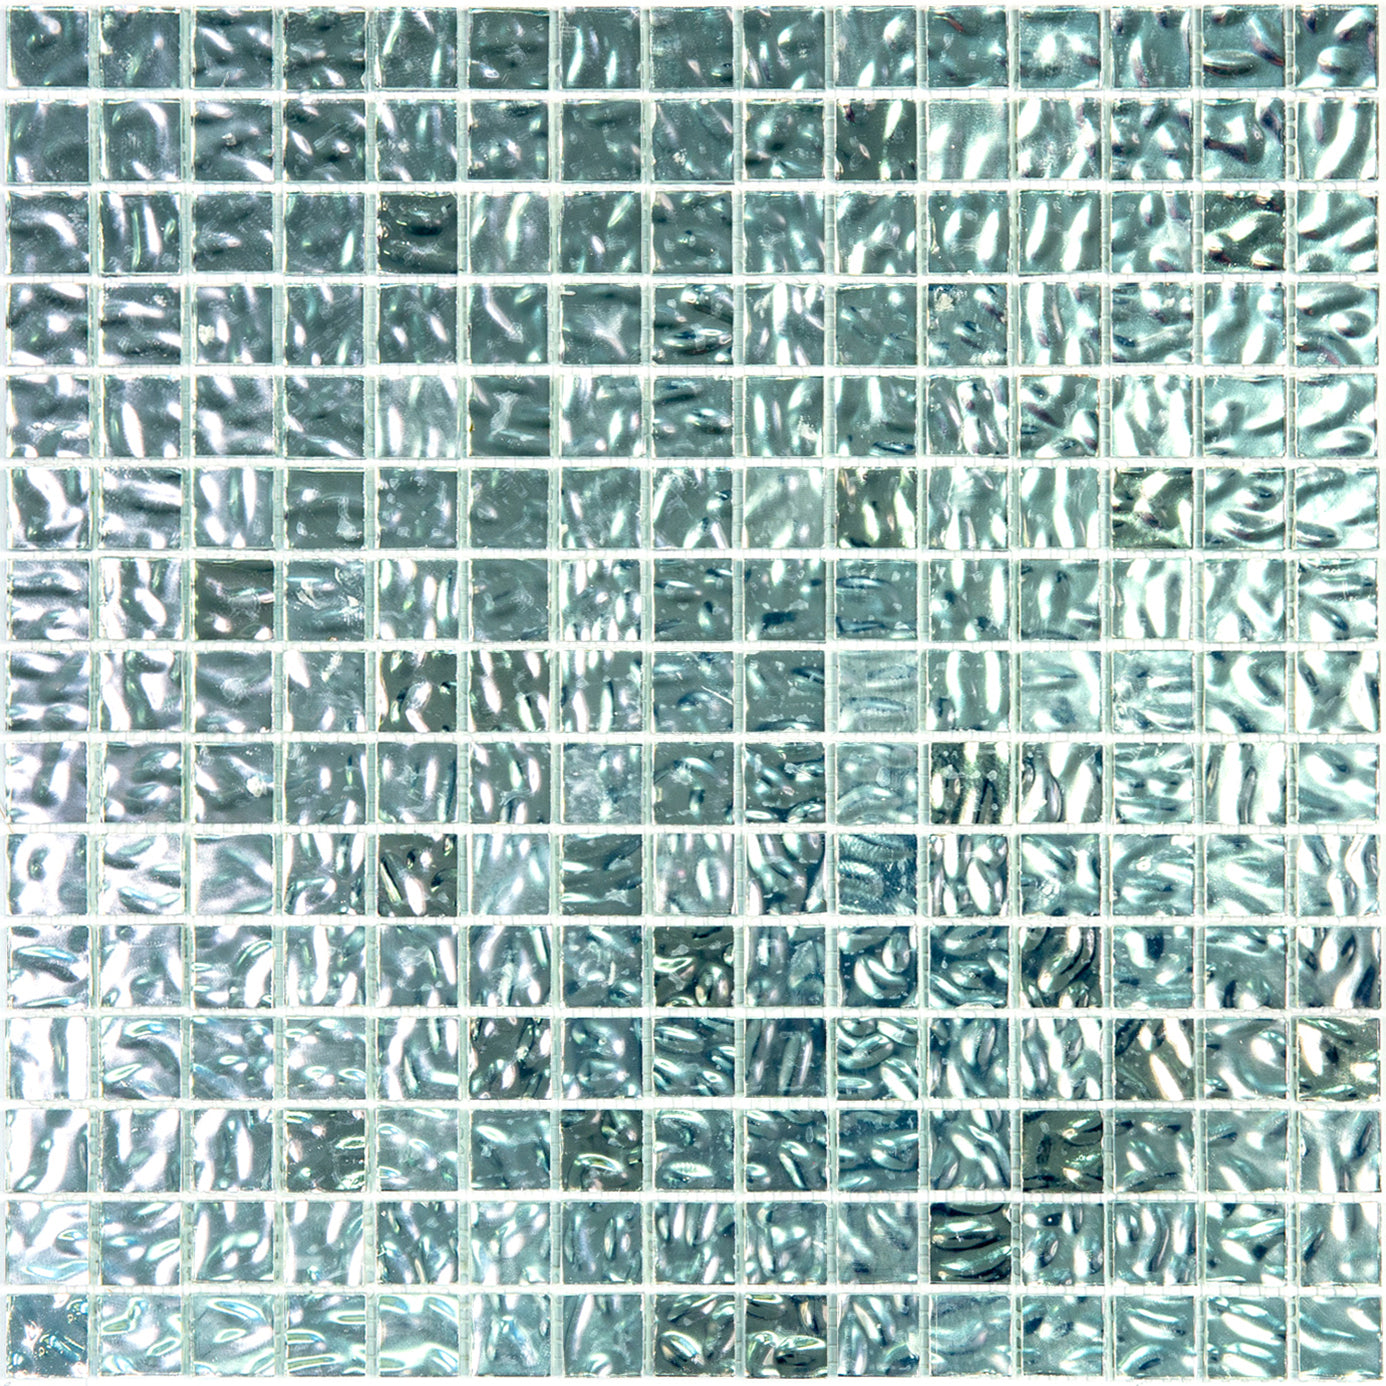 mir alma solid colors 0_8 inch fg s23 2 wall and floor mosaic distributed by surface group natural materials